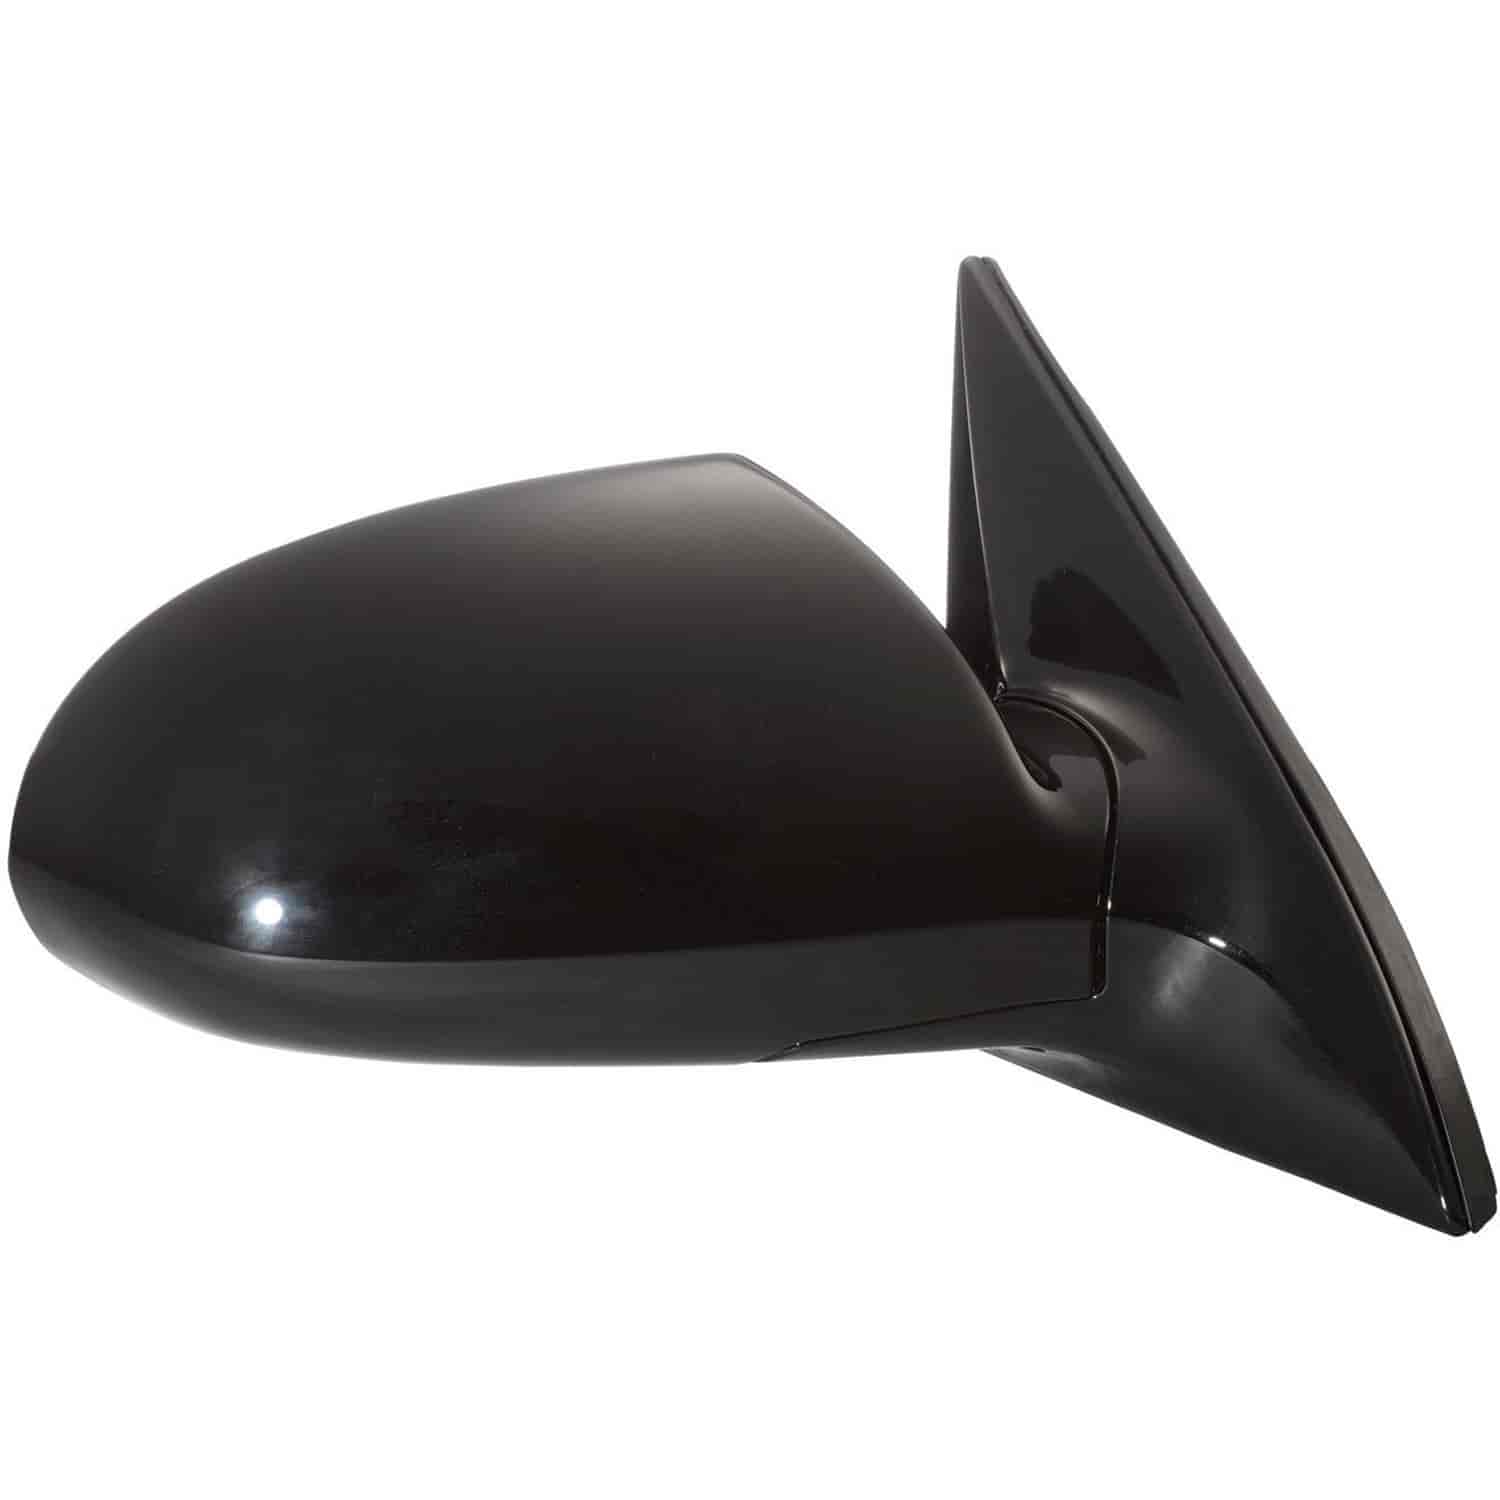 OEM Style Replacement mirror for 07-10 Hyundai Elantra sedan passenger side mirror tested to fit and